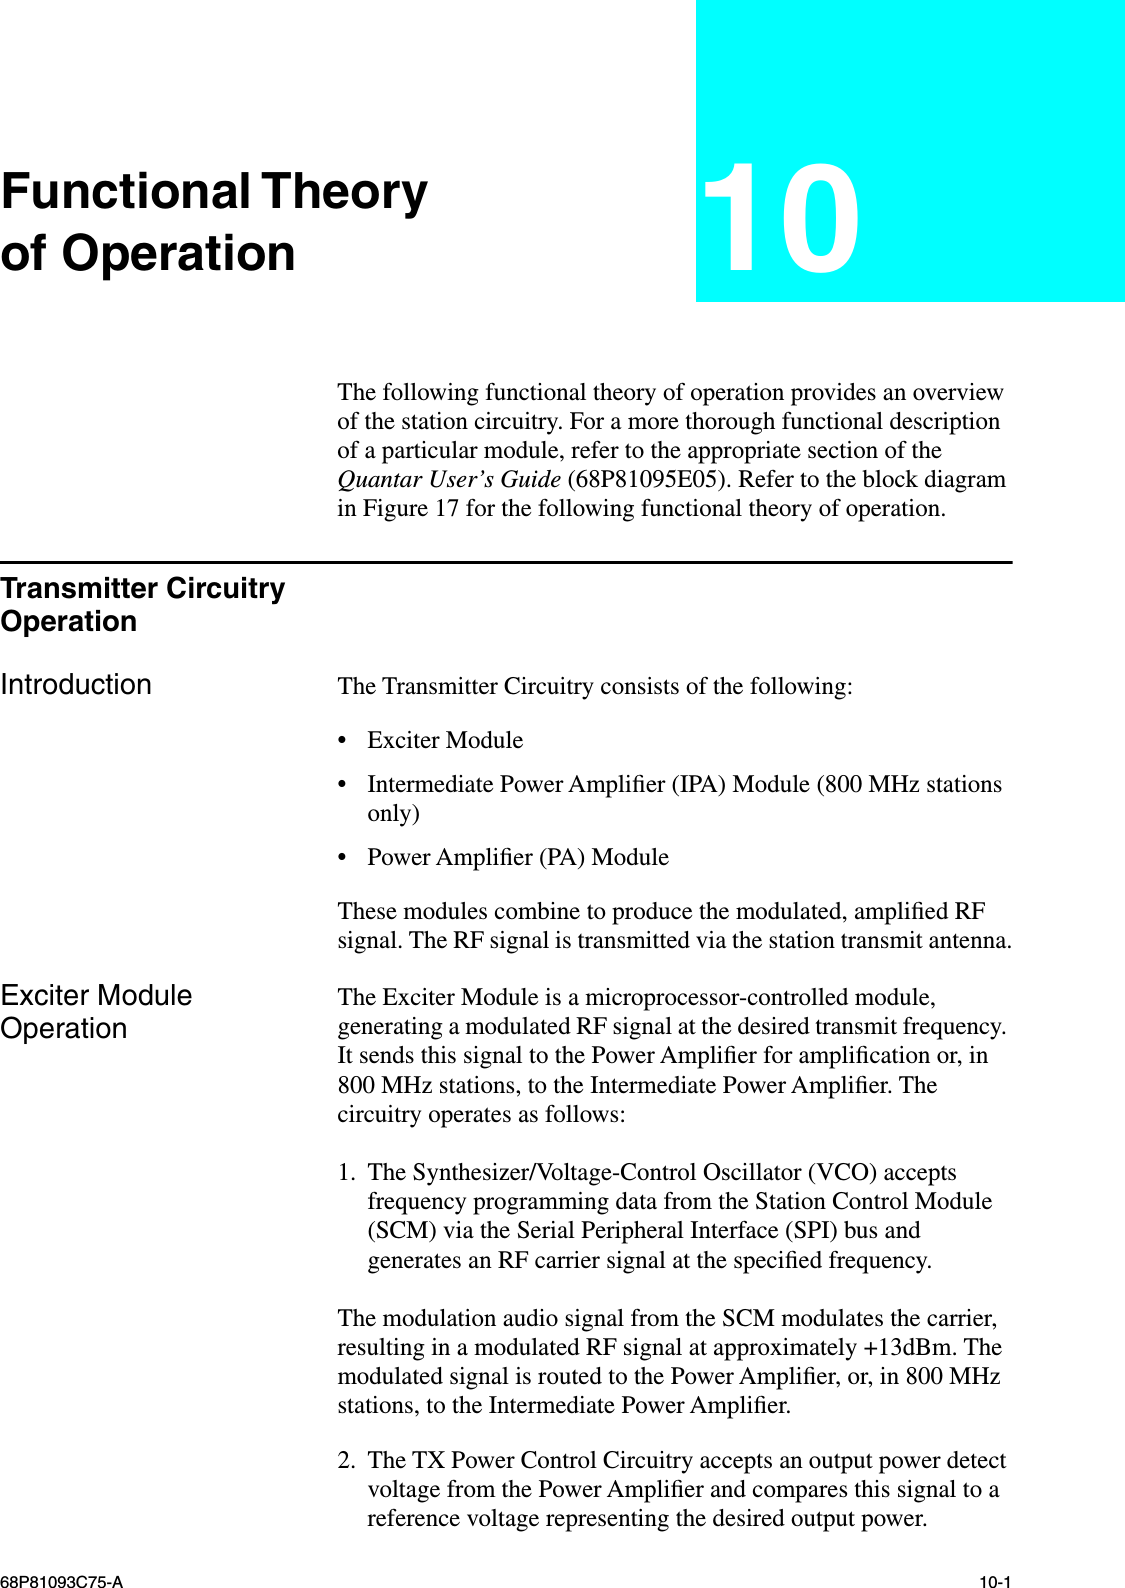  68P81093C75-A 10-1 Functional Theoryof Operation 10 The following functional theory of operation provides an overview of the station circuitry. For a more thorough functional description of a particular module, refer to the appropriate section of the  Quantar User’s Guide  (68P81095E05). Refer to the block diagram in Figure 17 for the following functional theory of operation. Transmitter Circuitry Operation Introduction The Transmitter Circuitry consists of the following: • Exciter Module • Intermediate Power Ampliﬁer (IPA) Module (800 MHz stations only) • Power Ampliﬁer (PA) ModuleThese modules combine to produce the modulated, ampliﬁed RF signal. The RF signal is transmitted via the station transmit antenna. Exciter Module Operation The Exciter Module is a microprocessor-controlled module, generating a modulated RF signal at the desired transmit frequency. It sends this signal to the Power Ampliﬁer for ampliﬁcation or, in 800 MHz stations, to the Intermediate Power Ampliﬁer. The circuitry operates as follows:1. The Synthesizer/Voltage-Control Oscillator (VCO) accepts frequency programming data from the Station Control Module (SCM) via the Serial Peripheral Interface (SPI) bus and generates an RF carrier signal at the speciﬁed frequency.The modulation audio signal from the SCM modulates the carrier, resulting in a modulated RF signal at approximately +13dBm. The modulated signal is routed to the Power Ampliﬁer, or, in 800 MHz stations, to the Intermediate Power Ampliﬁer.2. The TX Power Control Circuitry accepts an output power detect voltage from the Power Ampliﬁer and compares this signal to a reference voltage representing the desired output power.